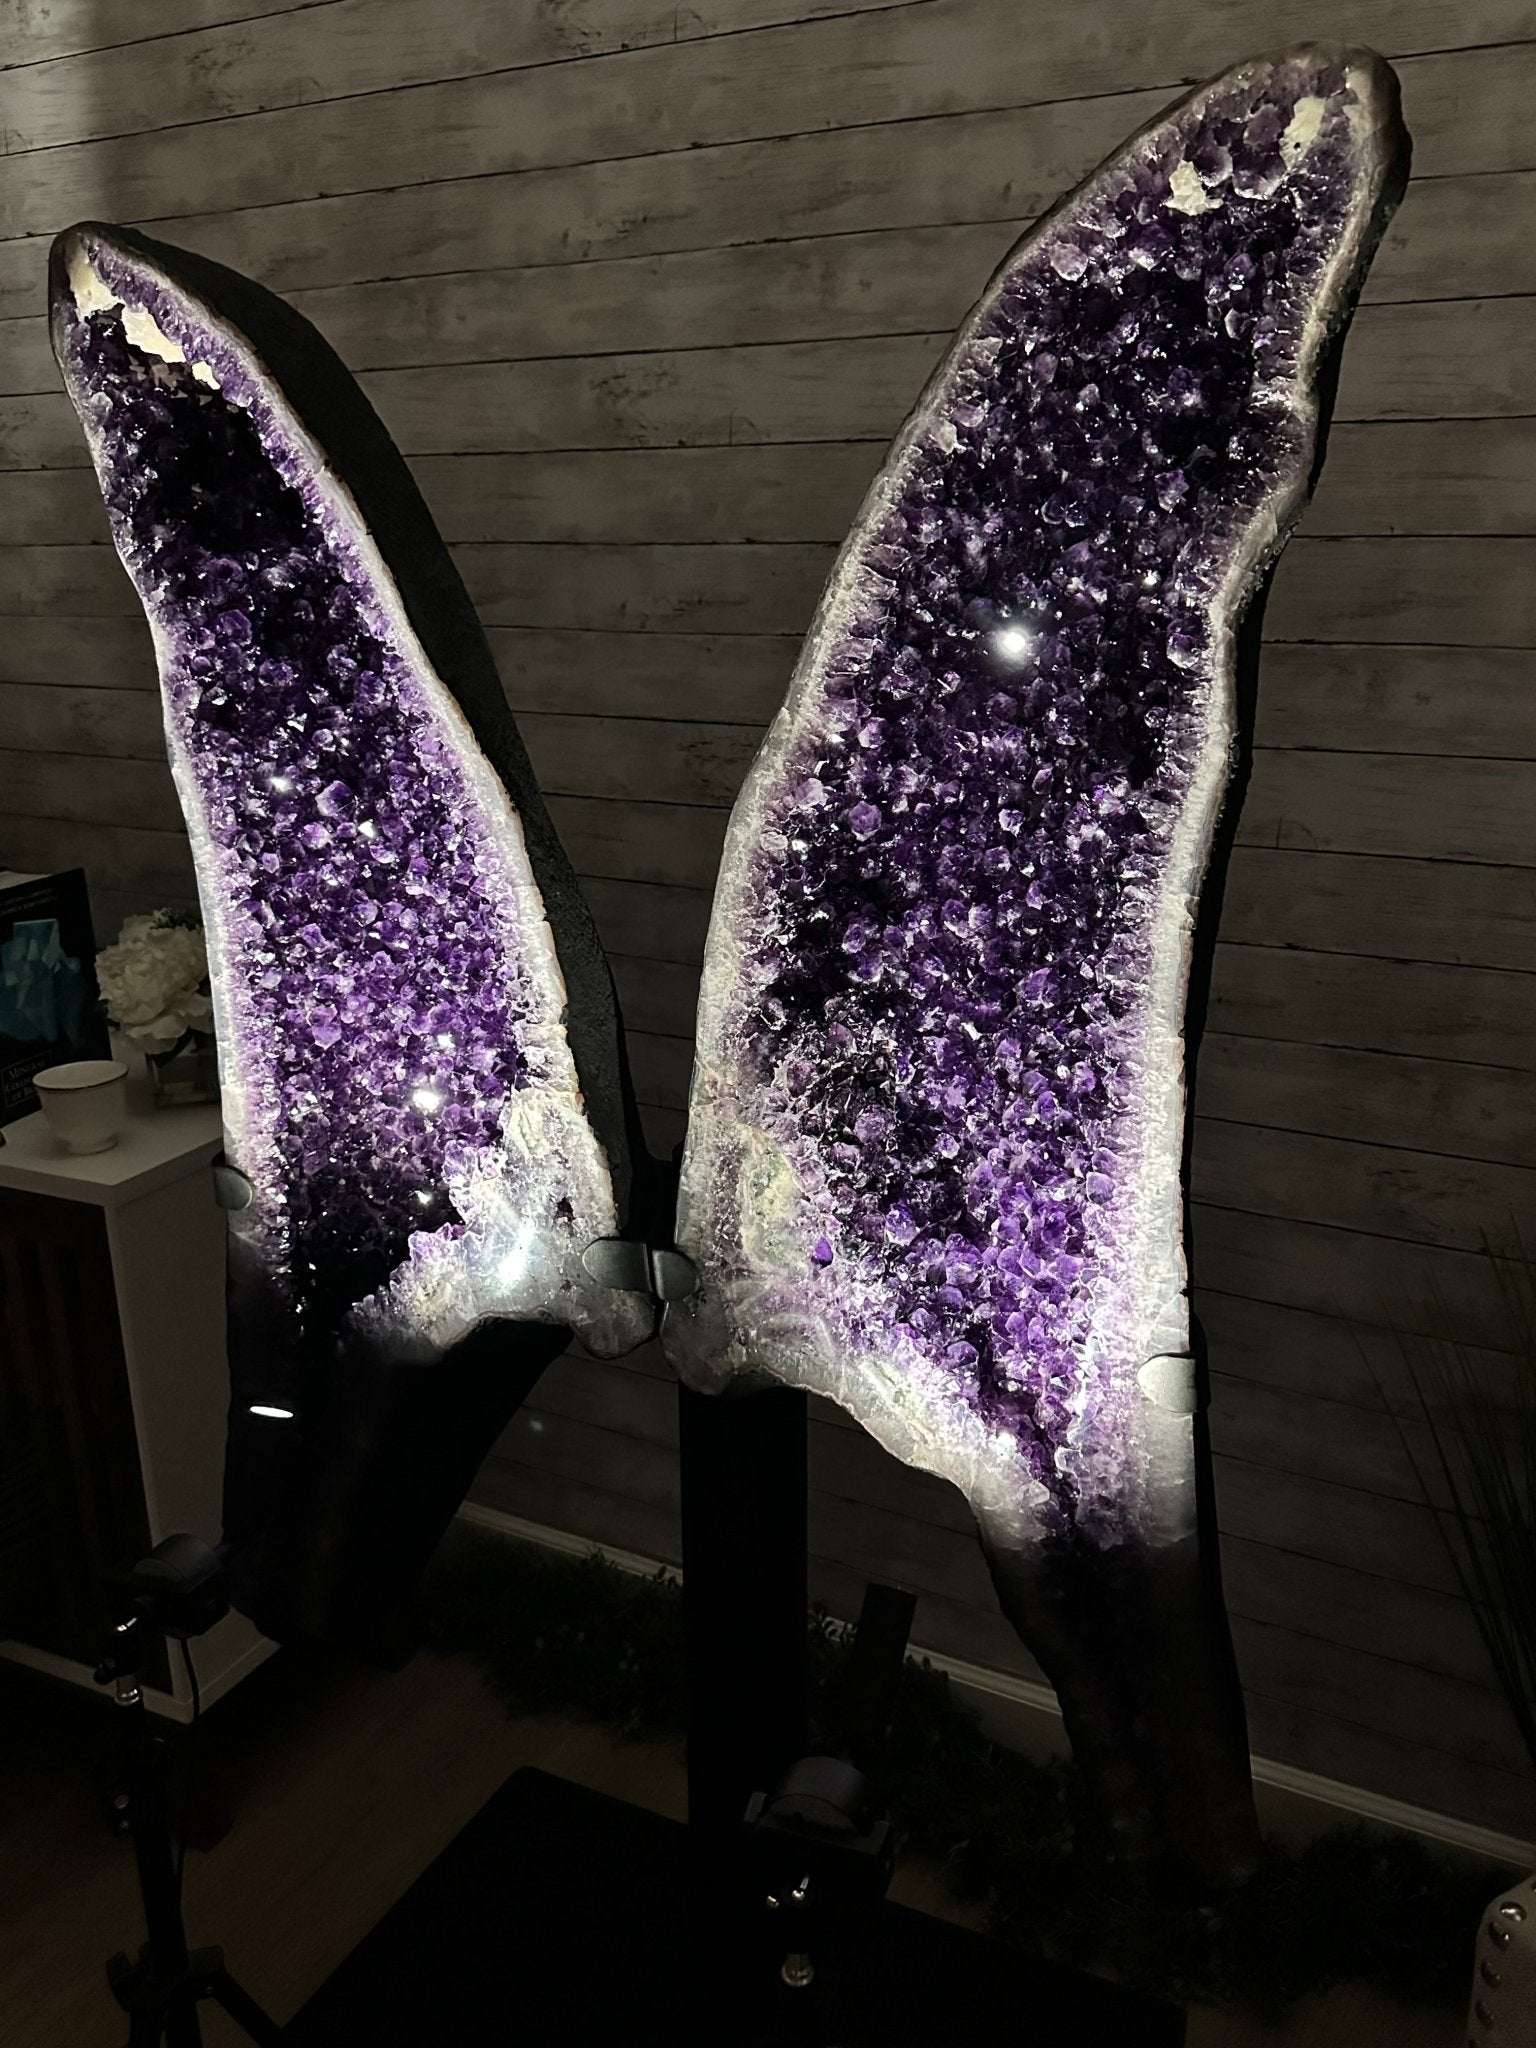 Large Super Quality Amethyst Wings on a Metal Stand, 337 lbs, 63" Tall #5493-0038 - Brazil GemsBrazil GemsLarge Super Quality Amethyst Wings on a Metal Stand, 337 lbs, 63" Tall #5493-0038Amethyst Butterfly Wings5493-0038